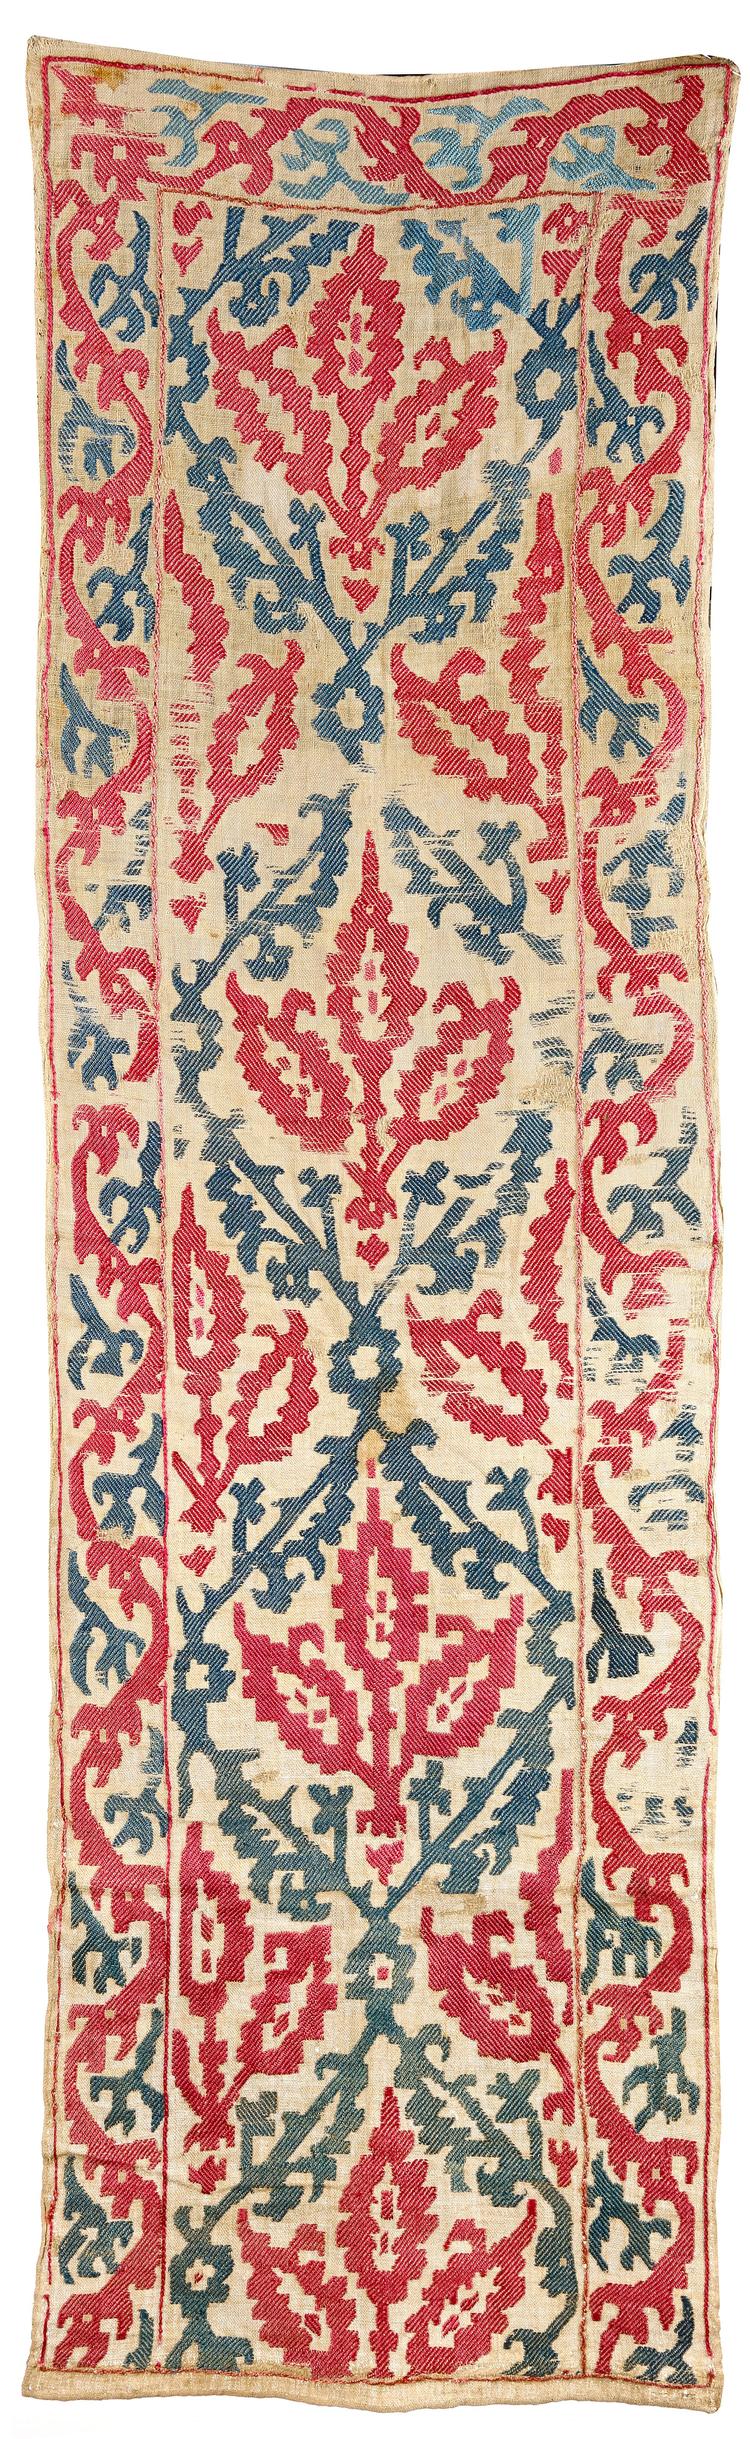 A SILK EMBROIDERY, OTTOMAN, POSSIBLY GREECE, 17TH CENTURY